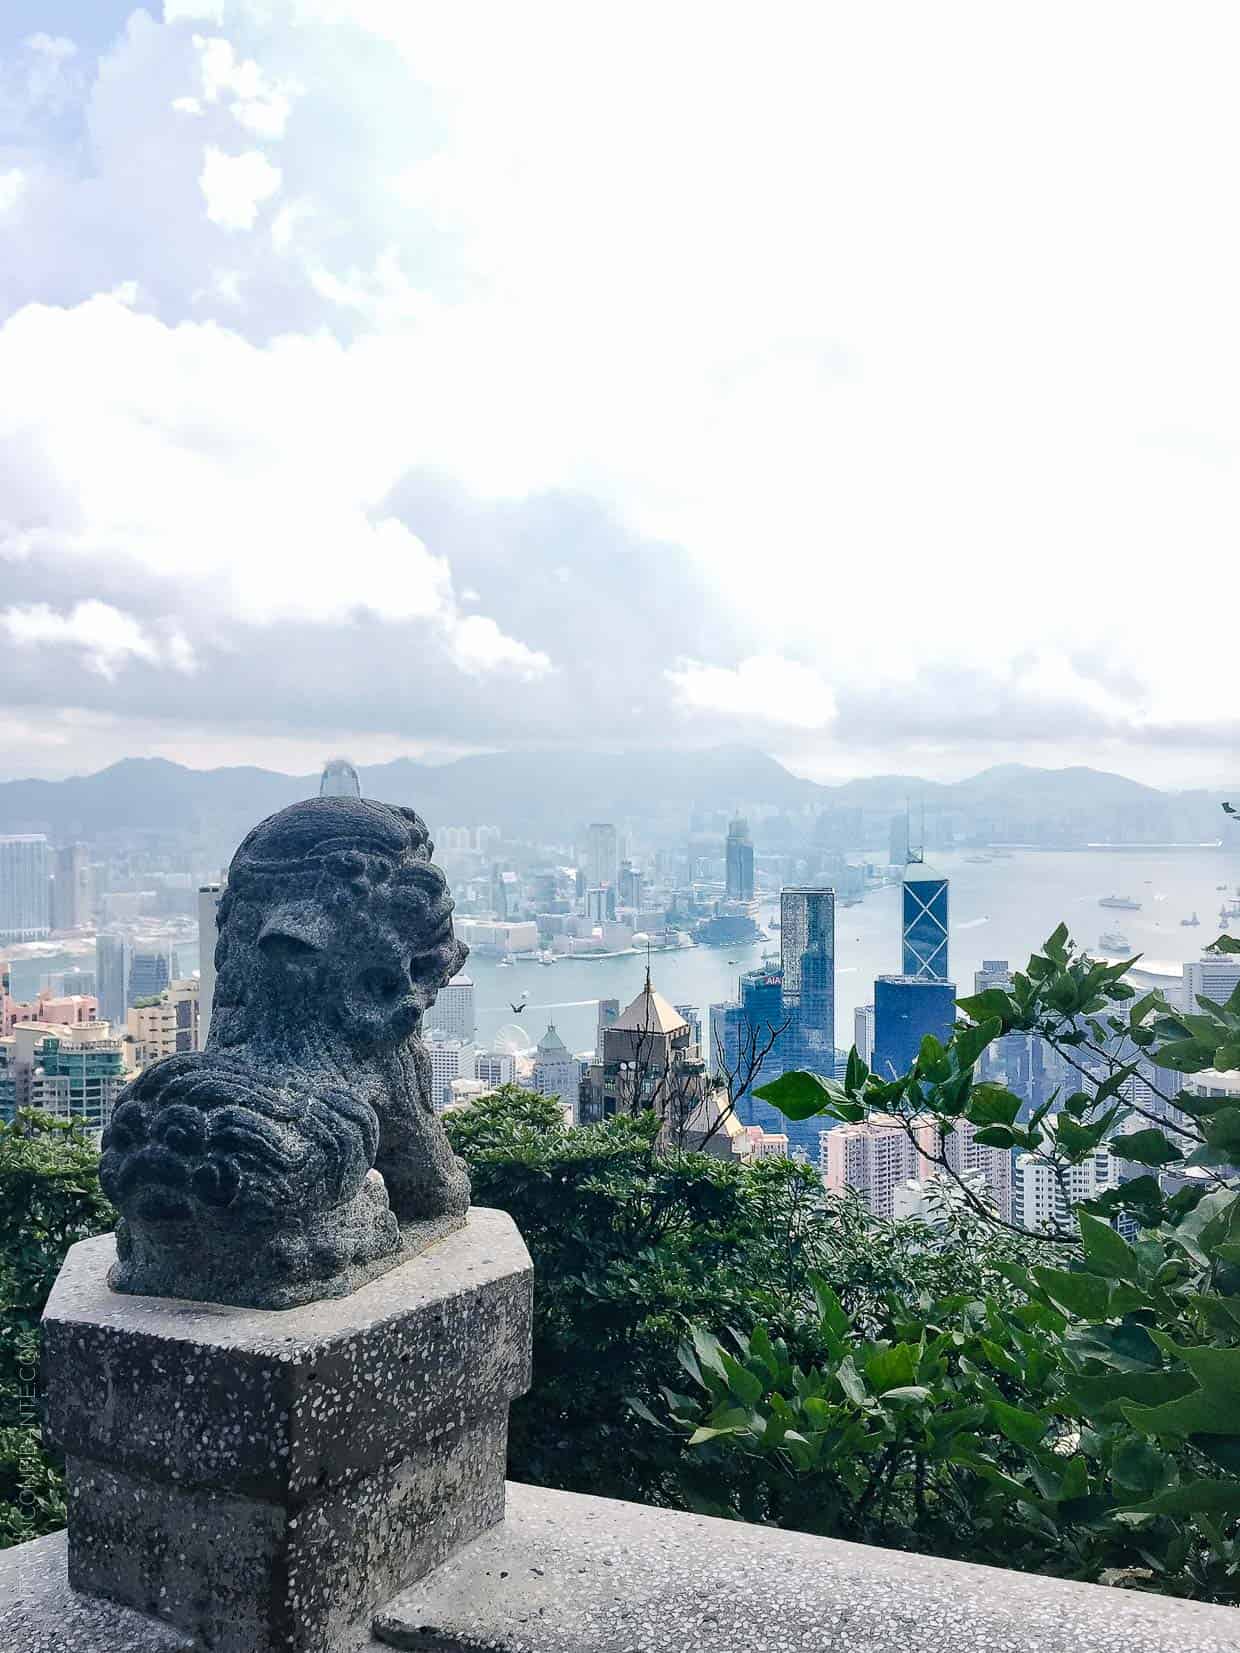 A Taste of Hong Kong- A Family Travel Guide // Planning a trip to Hong Kong? Come join me for our family’s pick on places to savor, stay and play in Asia’s World City!"